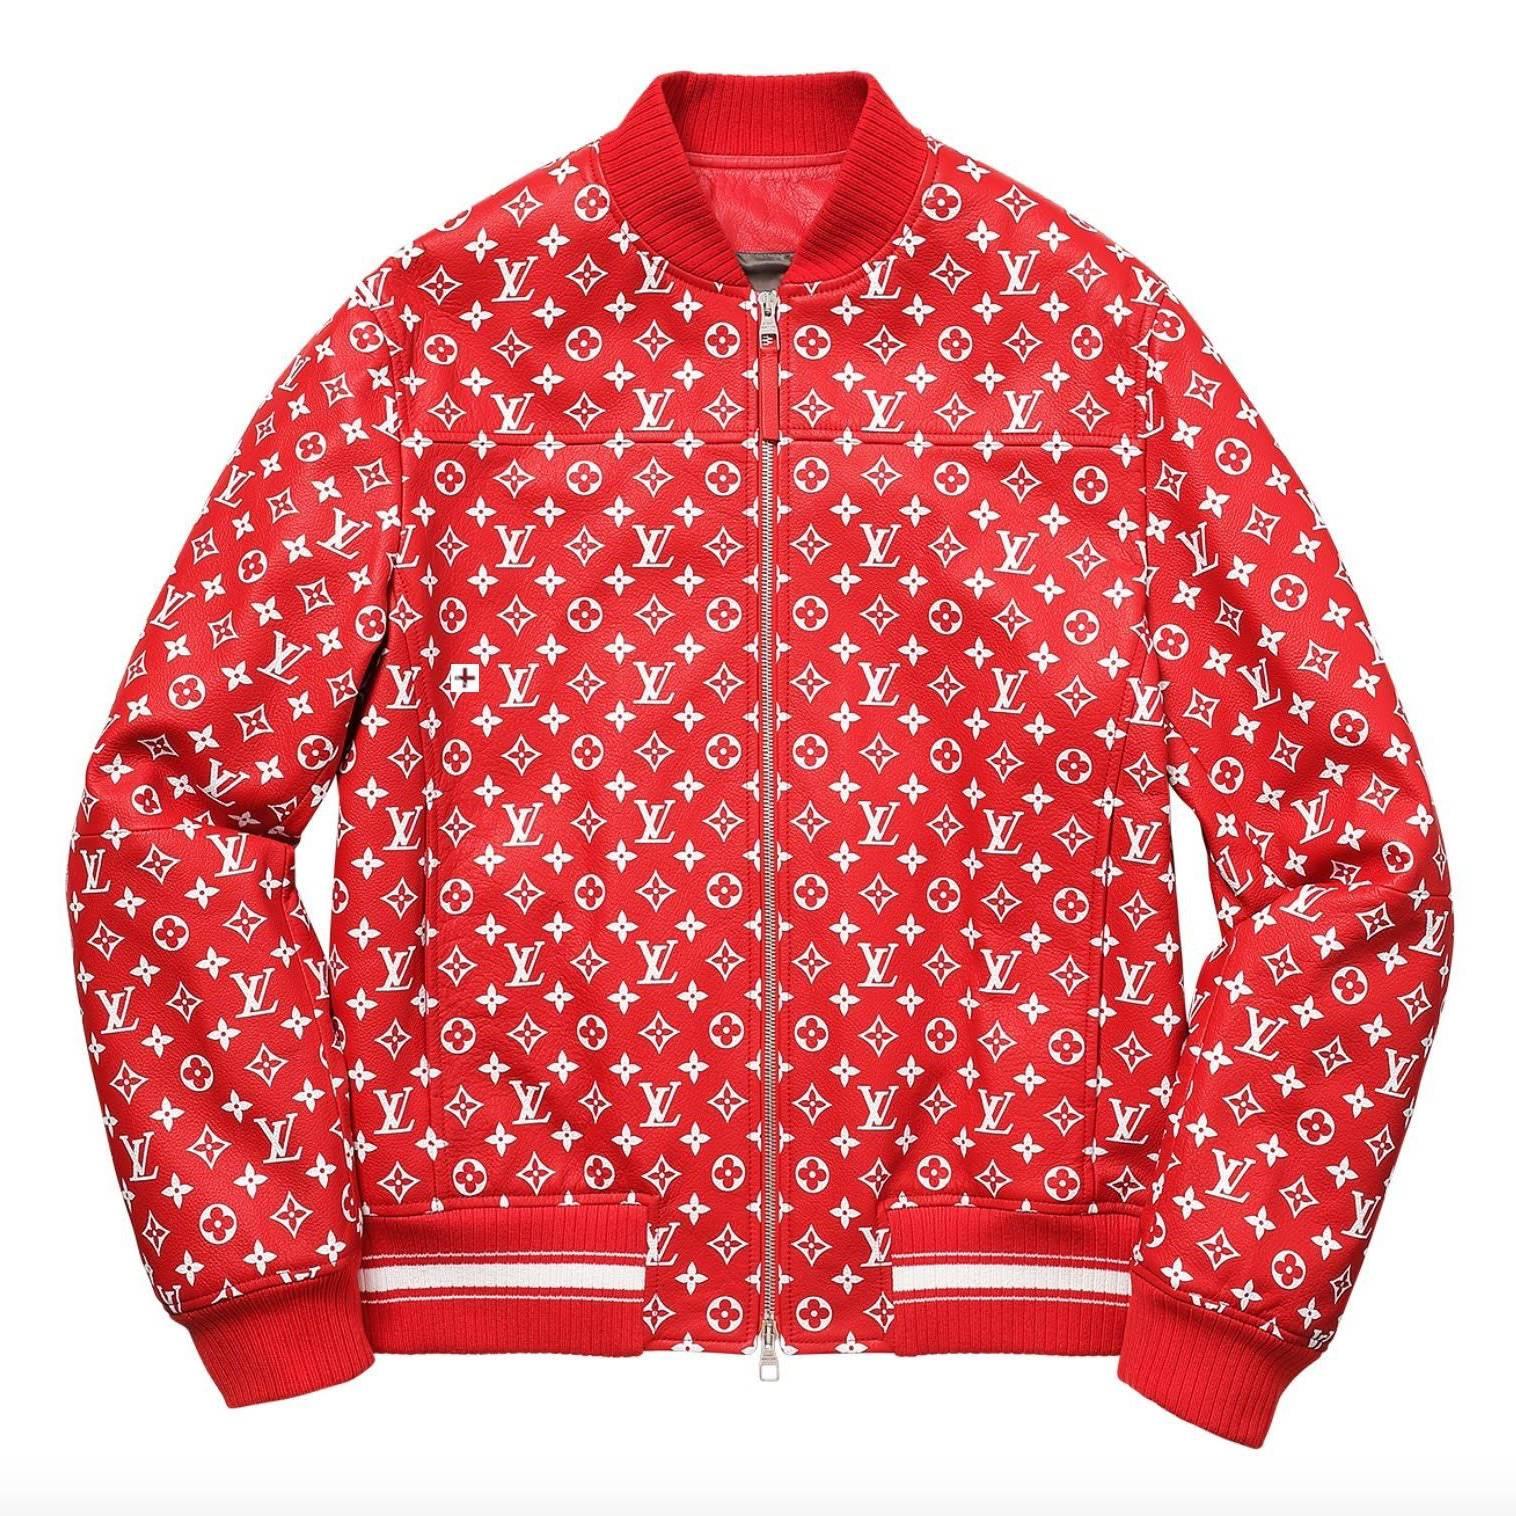 Guaranteed authentic highly coveted and sought after Louis Vuitton Supreme X Very Limited Edition LV Monogram leather bomber jacket.
Red fabric around neck, cuffs, and hips with SUPREME at rear.
Logo embossed front zip.
The collection is sold out